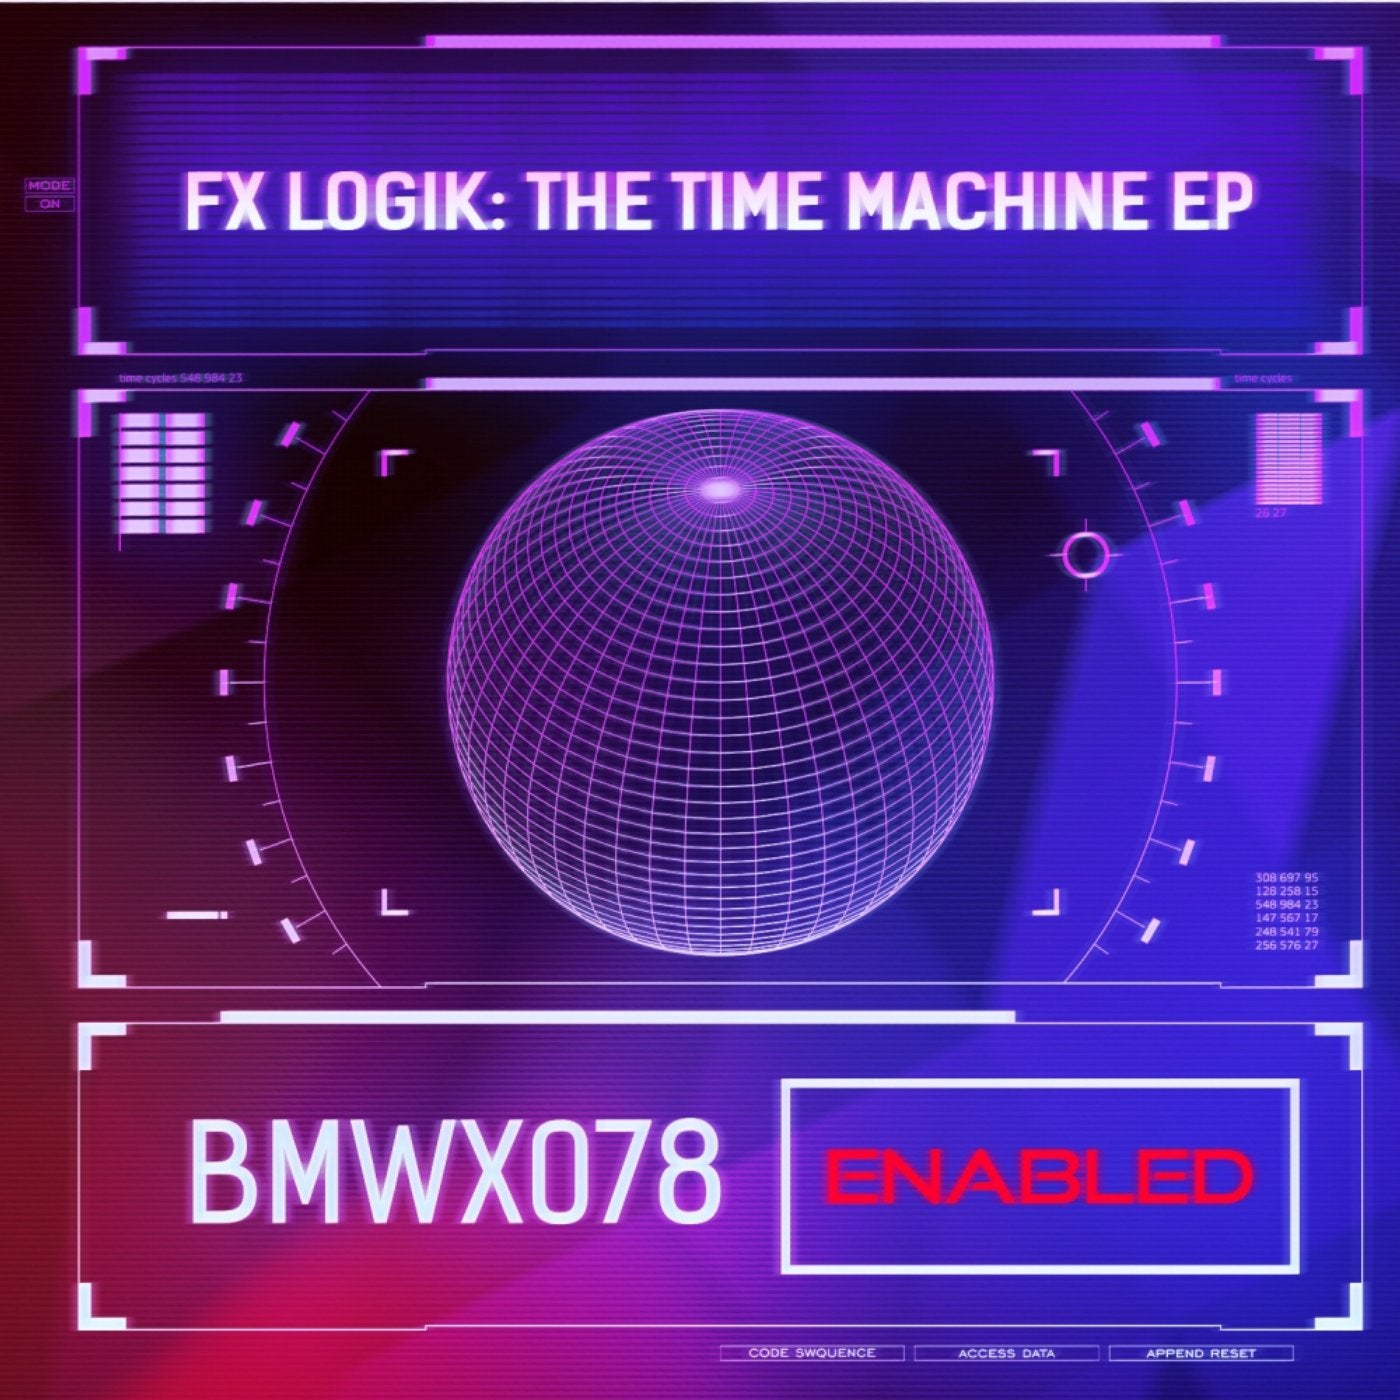 The Time Machine EP